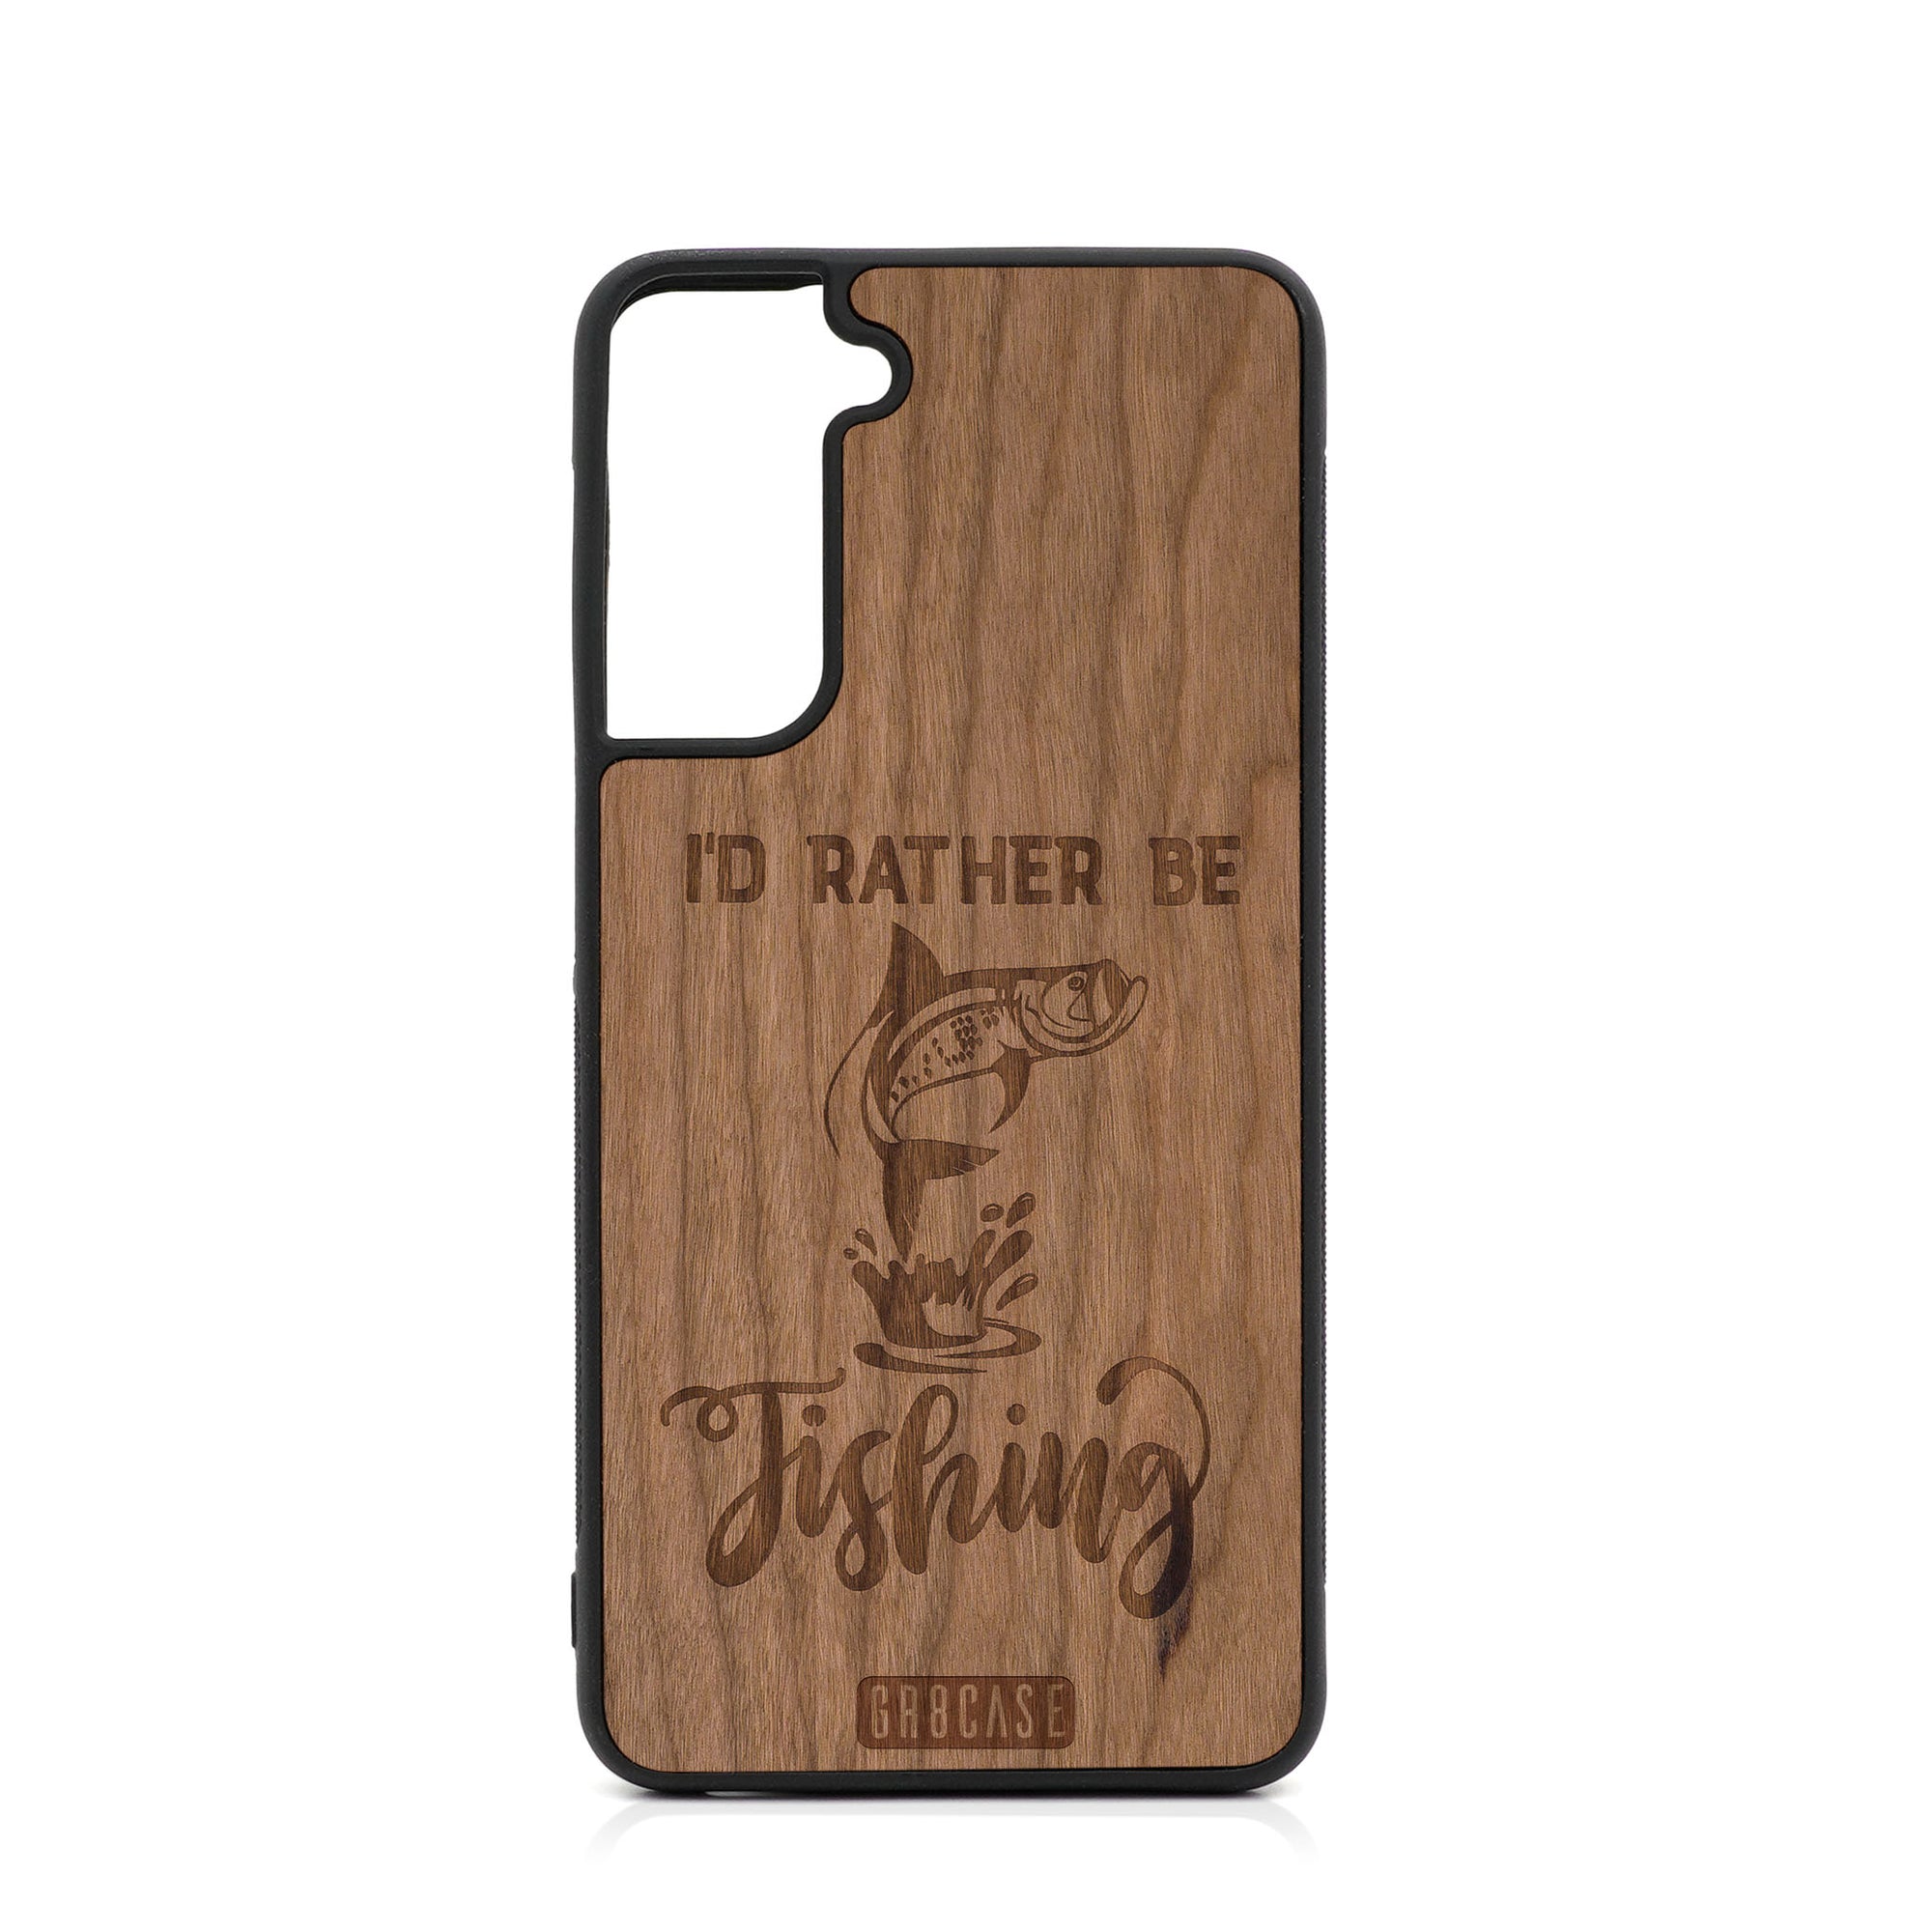 I'D Rather Be Fishing Design Wood Case For Samsung Galaxy S21 Plus 5G